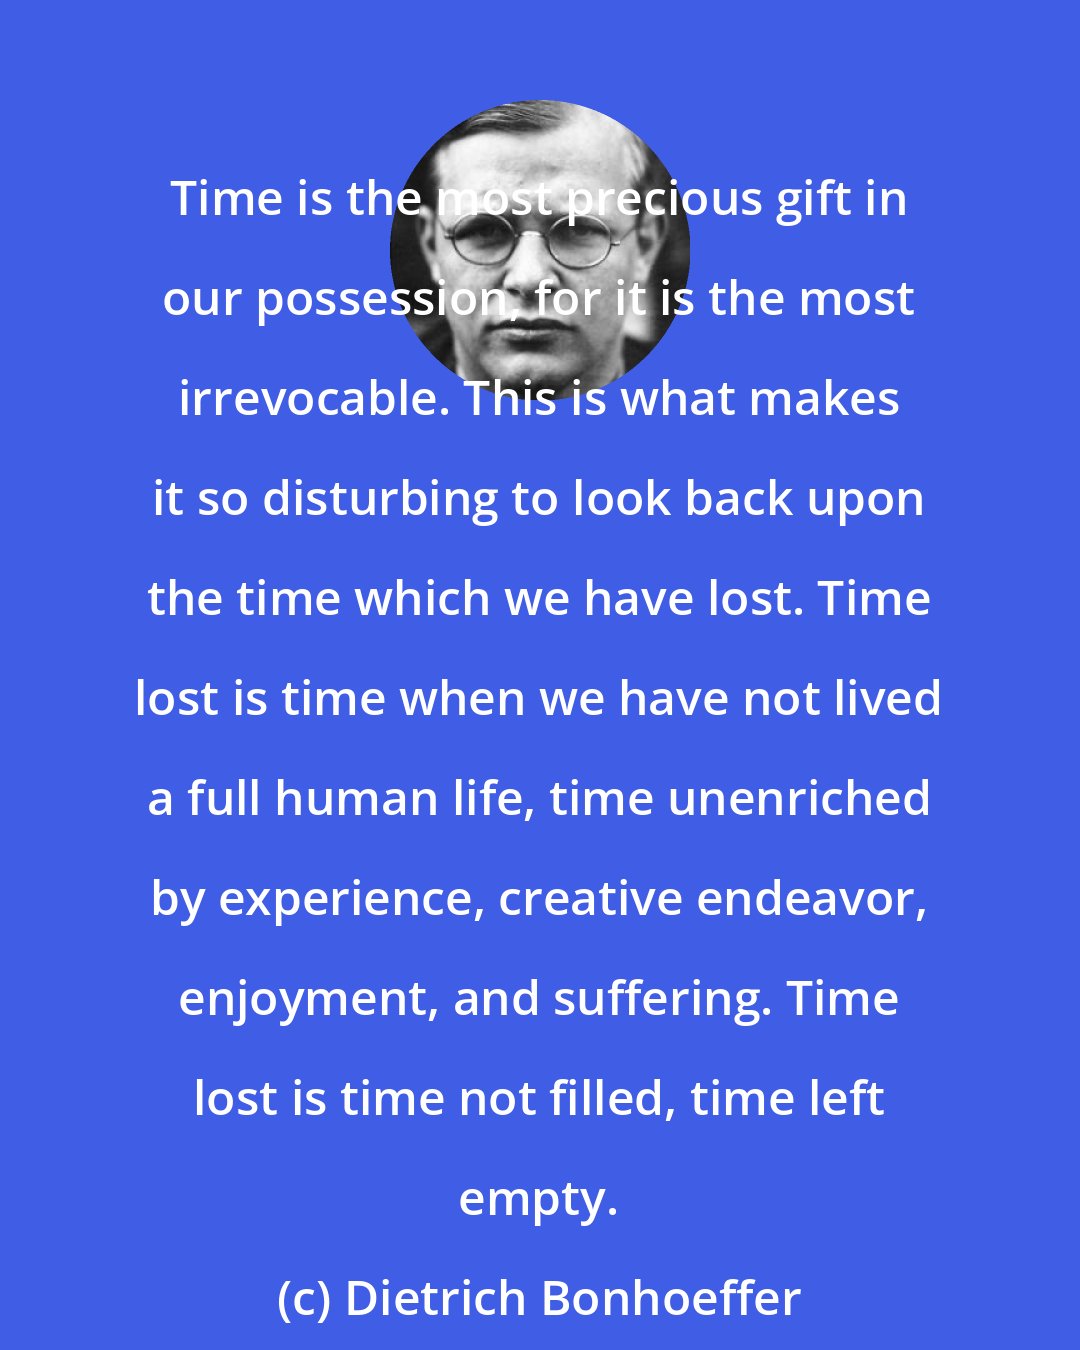 Dietrich Bonhoeffer: Time is the most precious gift in our possession, for it is the most irrevocable. This is what makes it so disturbing to look back upon the time which we have lost. Time lost is time when we have not lived a full human life, time unenriched by experience, creative endeavor, enjoyment, and suffering. Time lost is time not filled, time left empty.